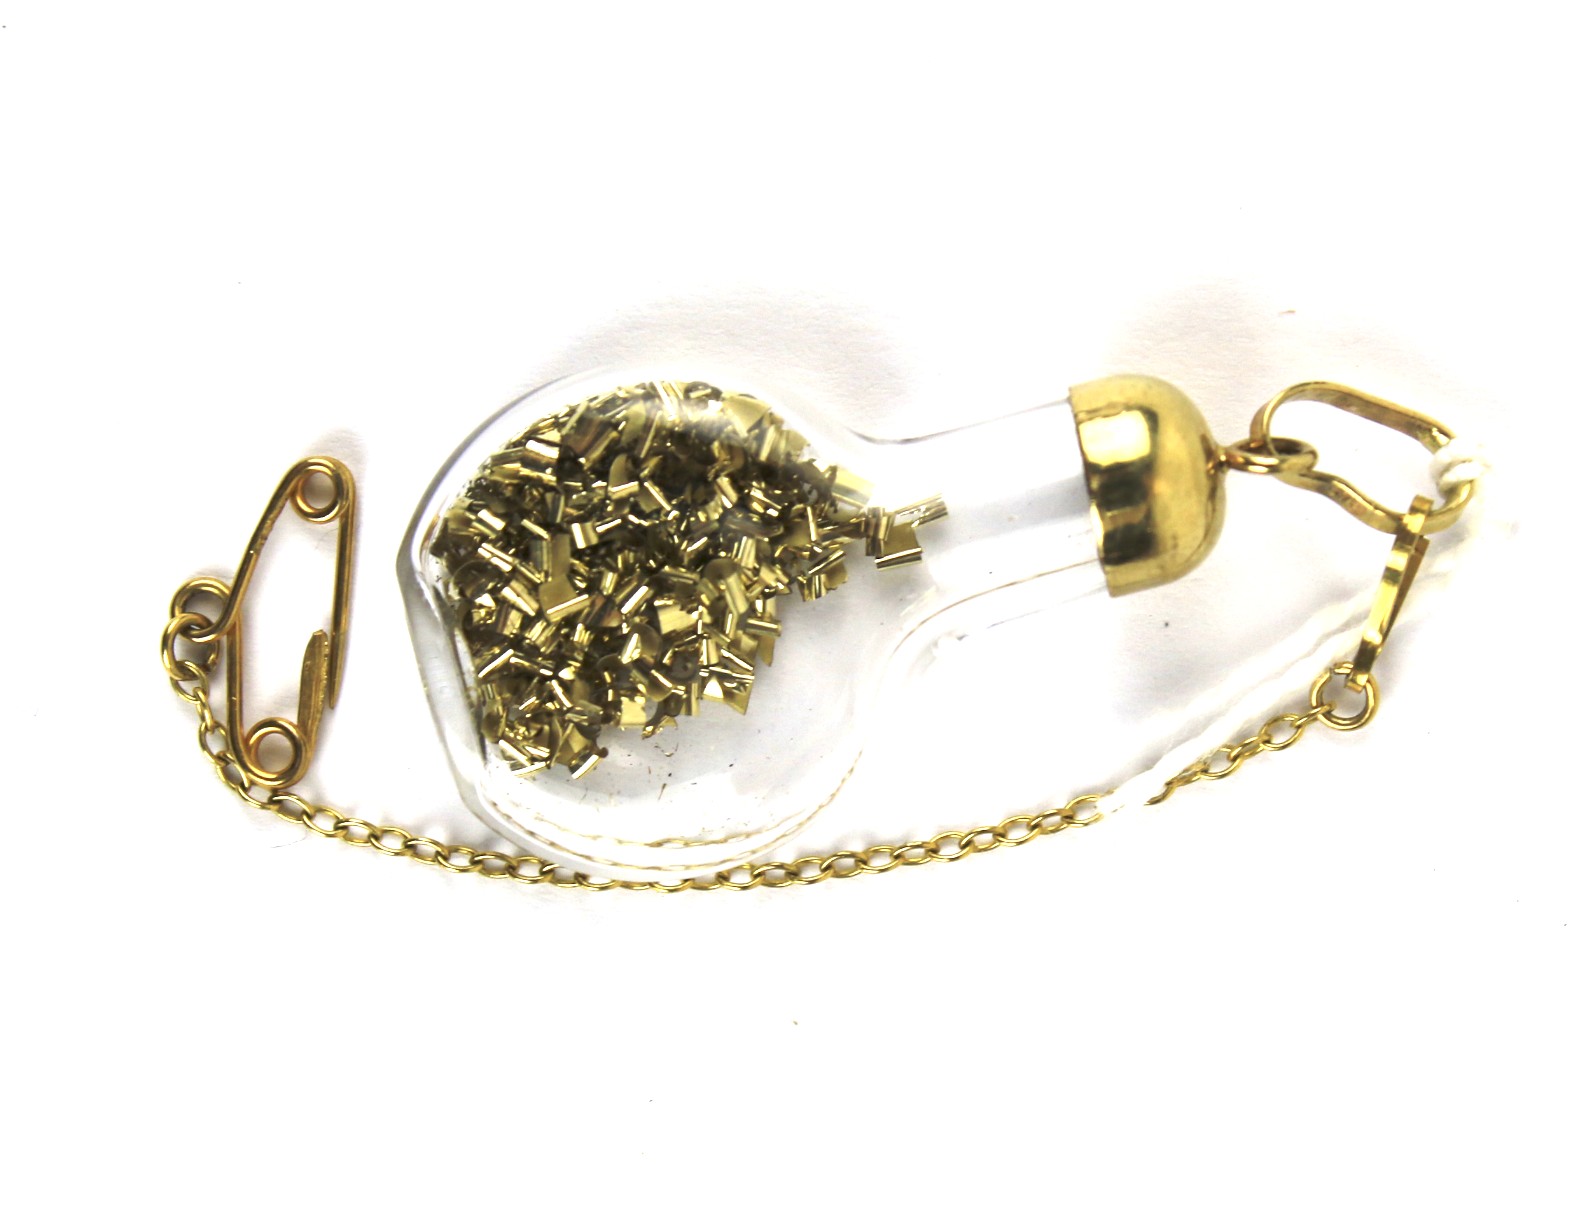 A pendant in the form of a glass flagon with gold shavings